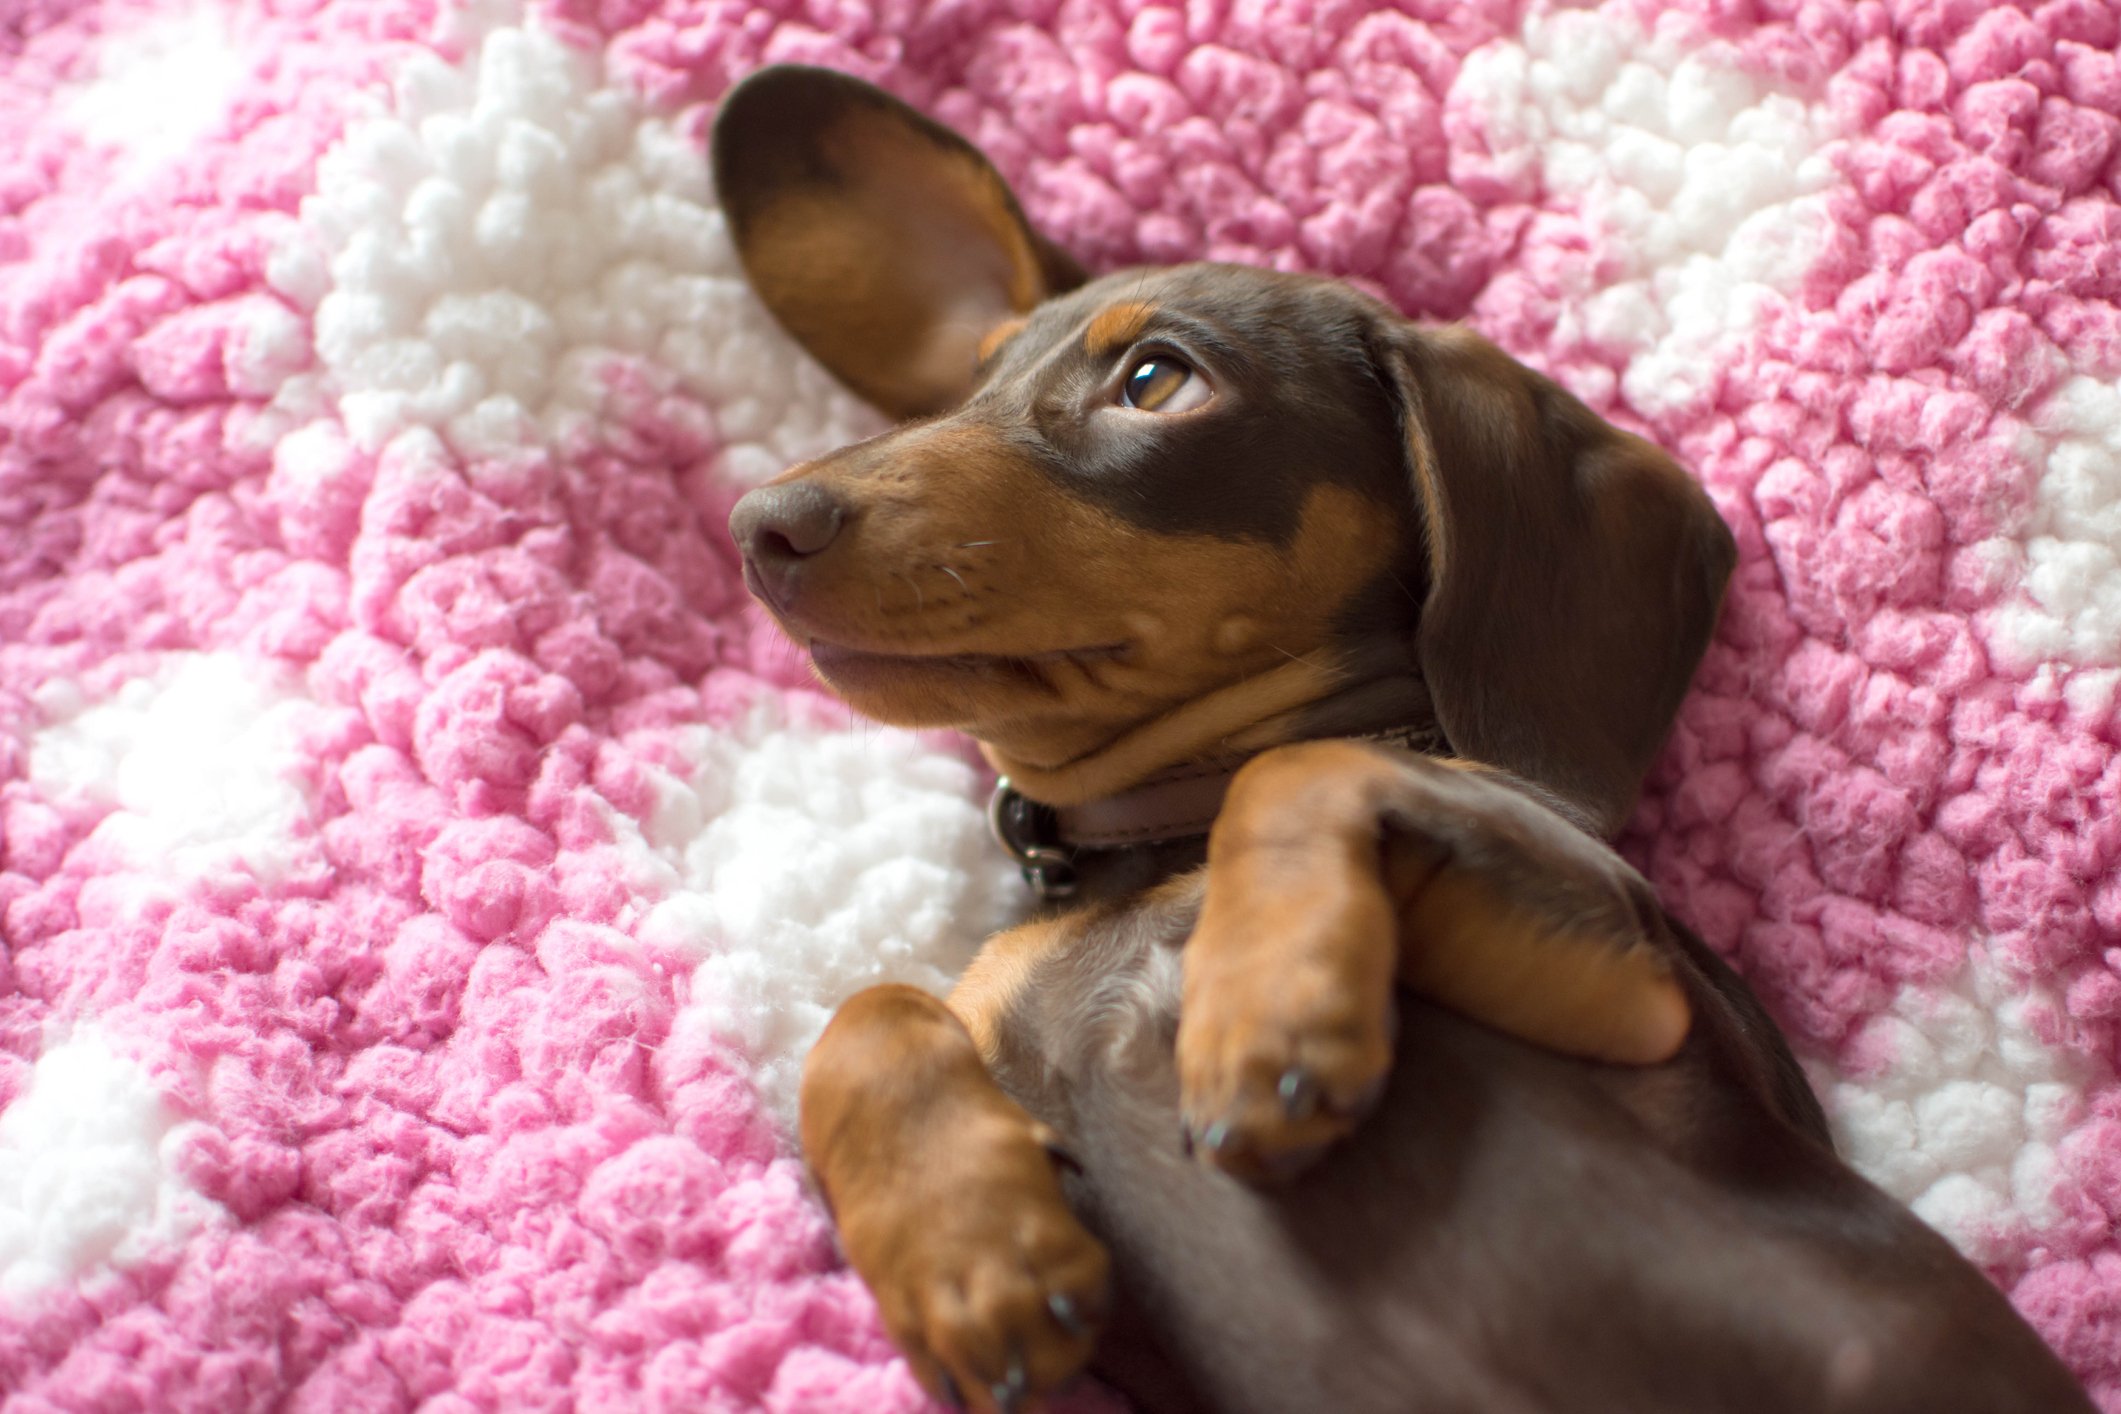 Dachshund Sally laying on a pink fluffy blanket | Photo: Getty Images